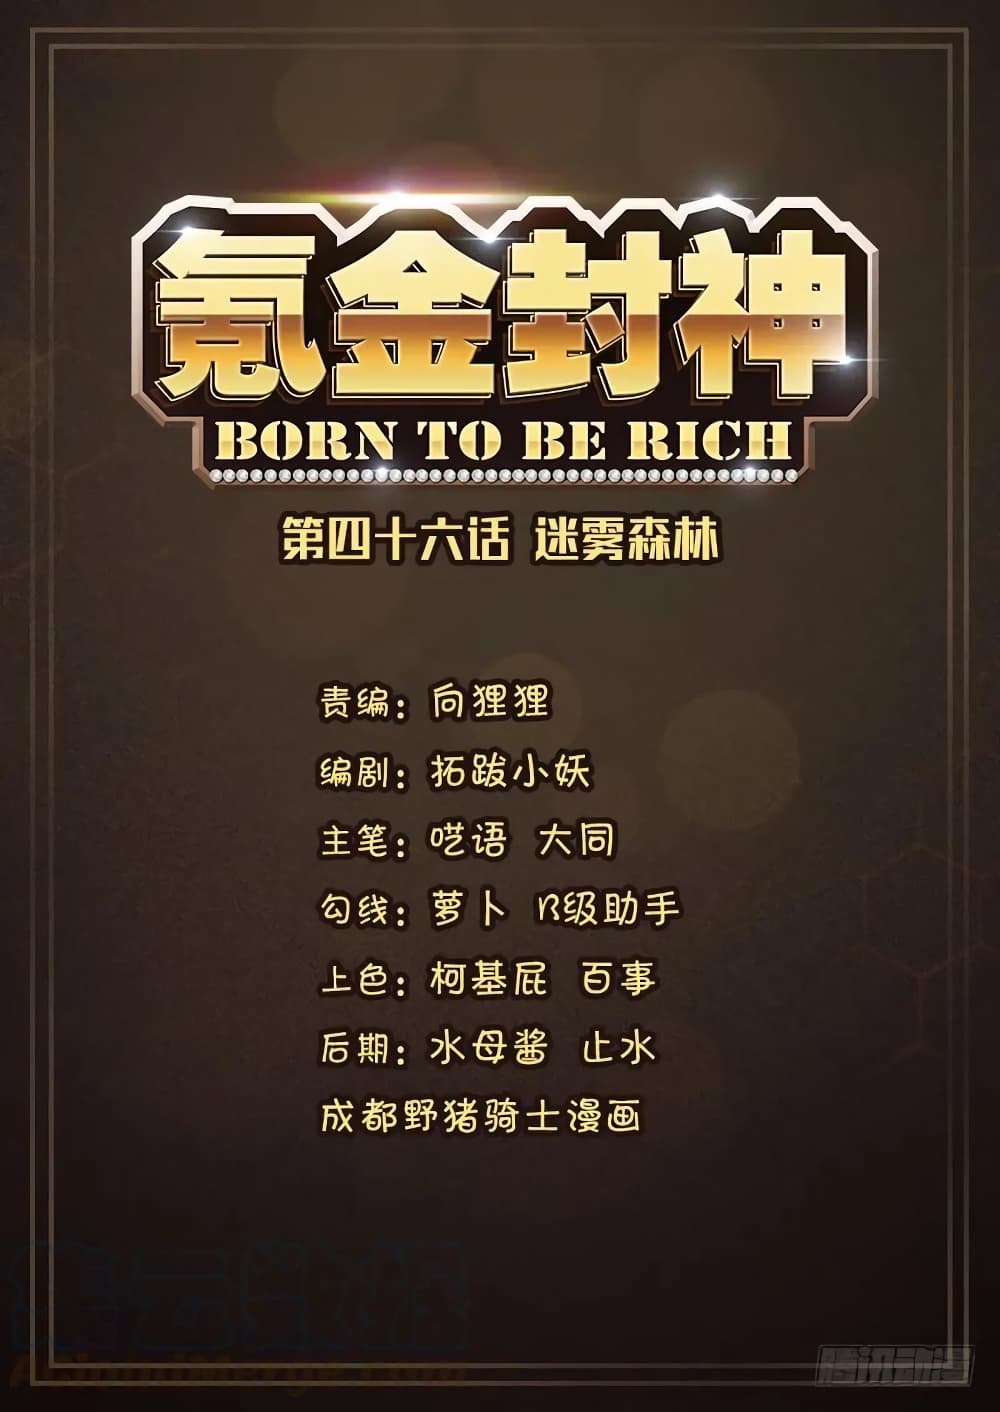 Born To Be Rich 47-47